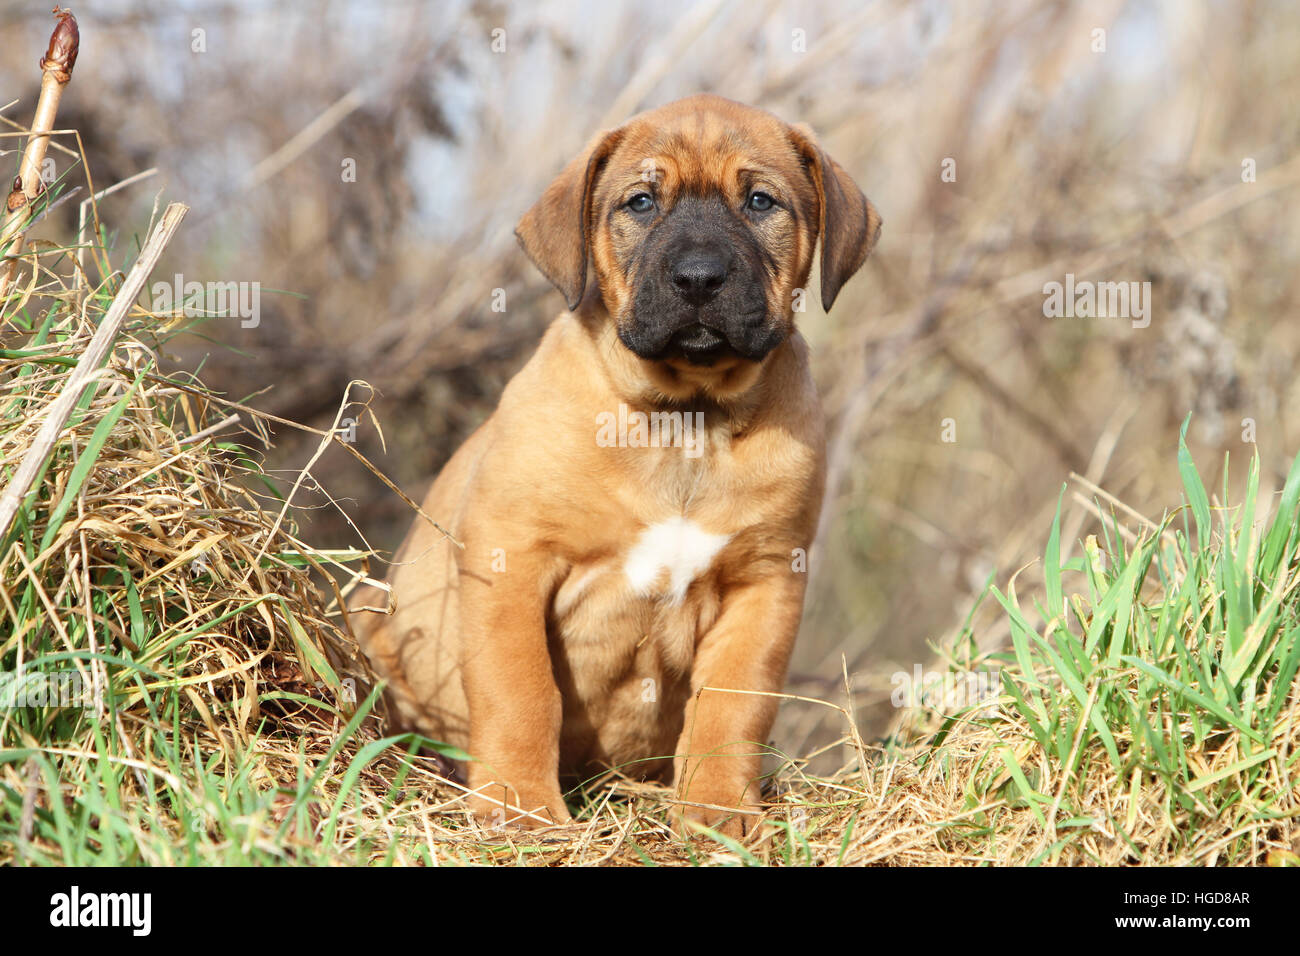 Dog Tosa Inu / Japanese Mastiff  puppy sitting in a meadow Stock Photo